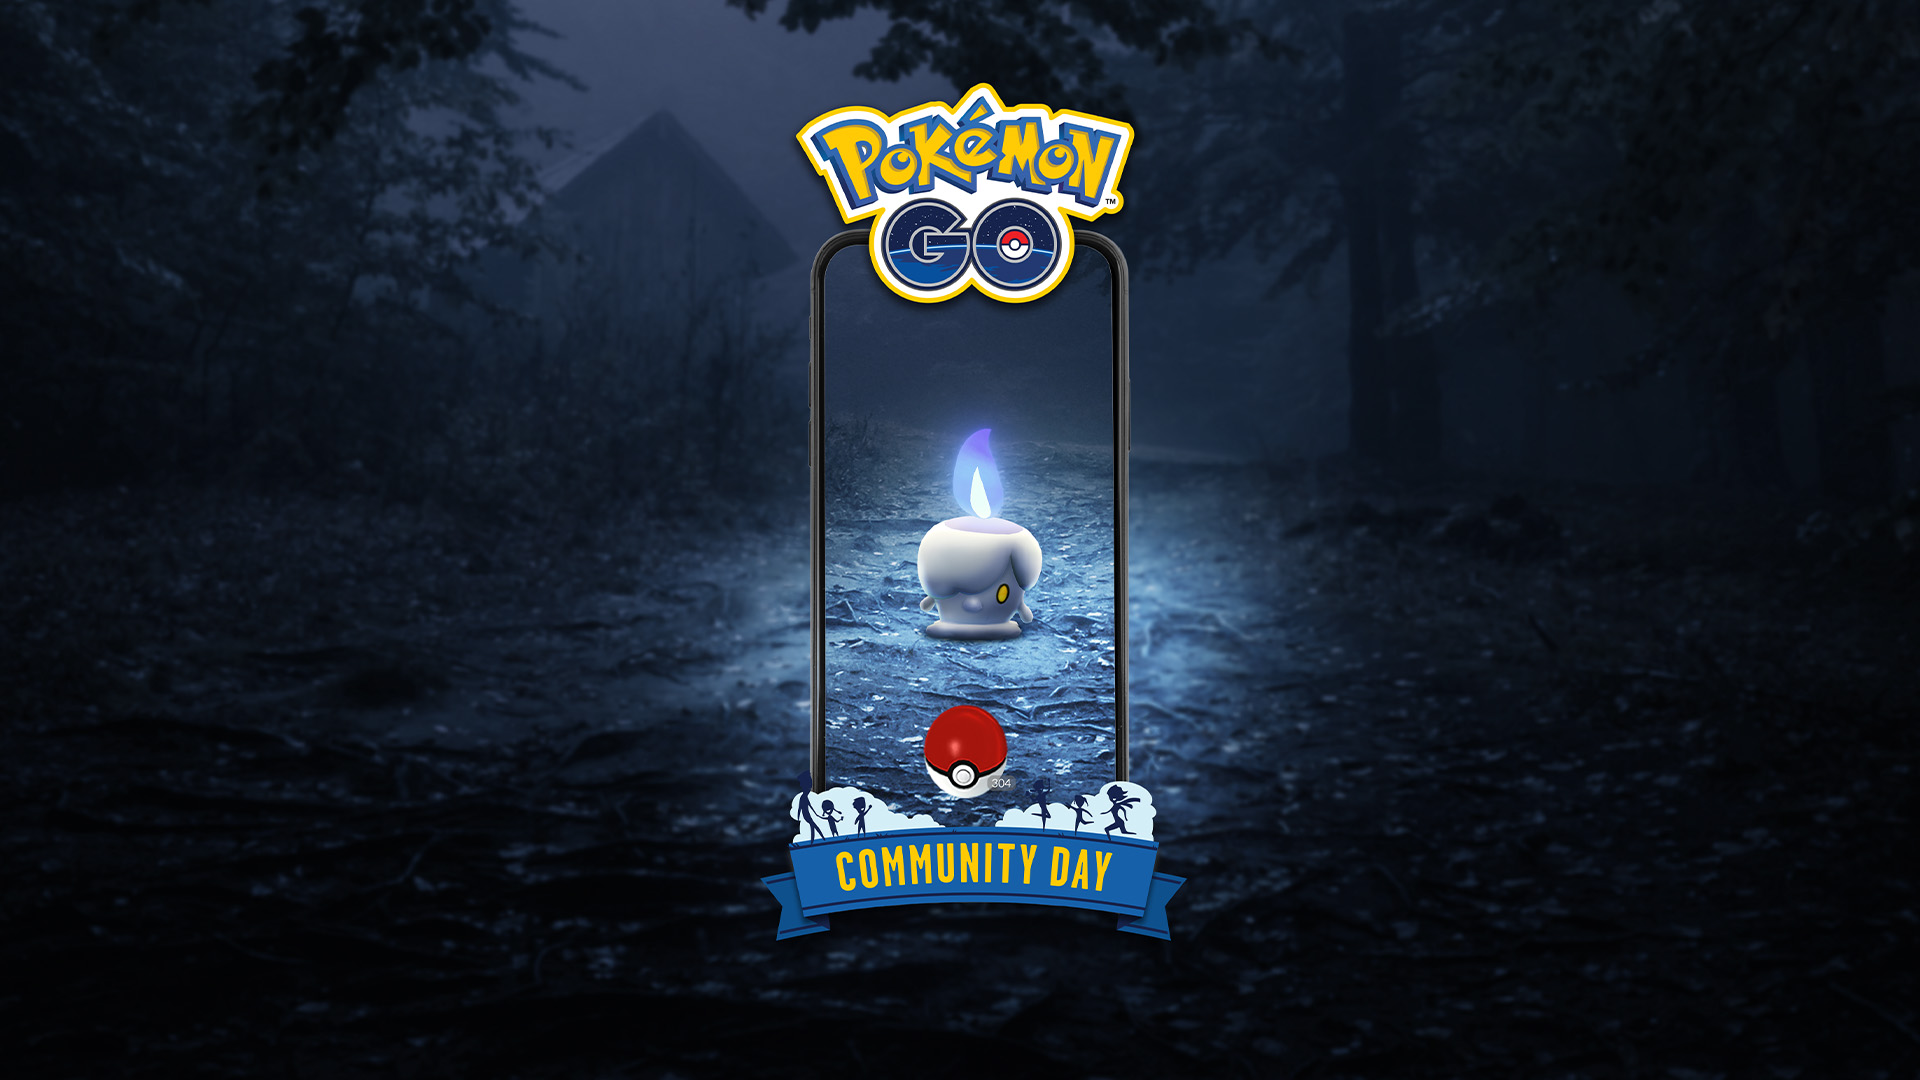 Litwick, a small candle Pokémon with a purple flame, stands in the dark forest through the AR of a phone with the Pokémon Go Community Day logos on it